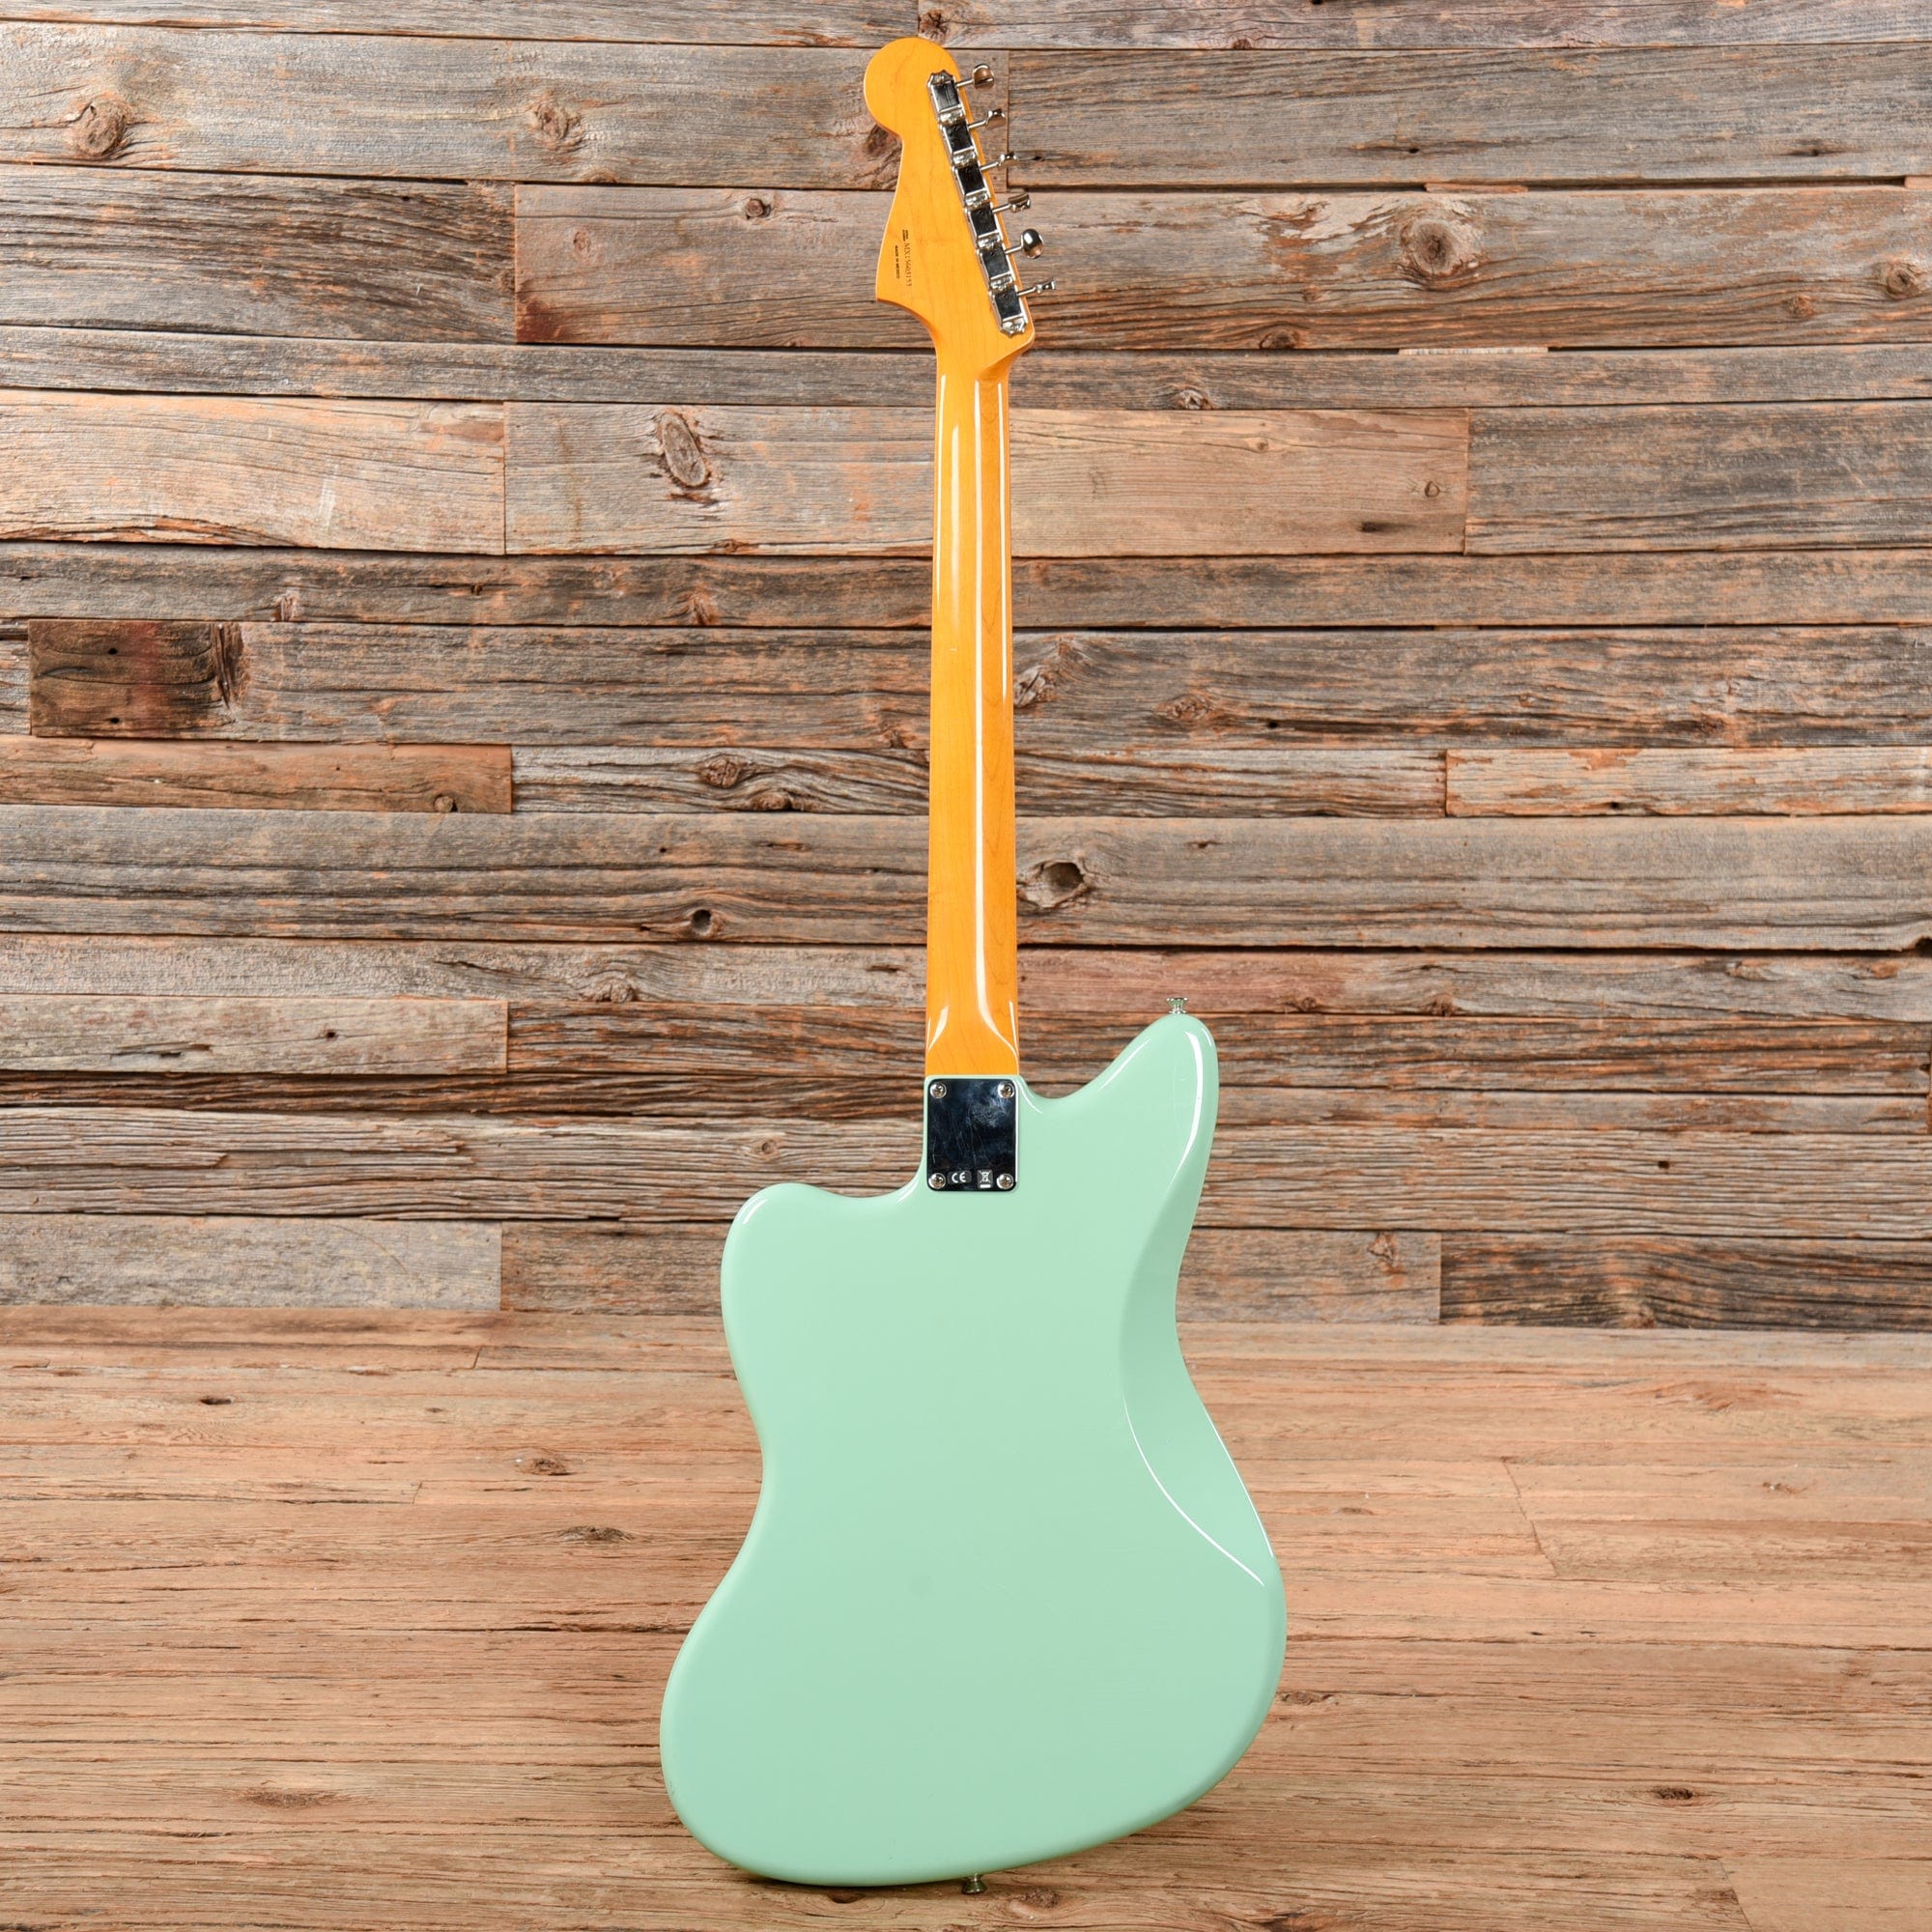 Fender Classic Series 60's Jazzmaster Lacquer Surf Green 2015 Electric Guitars / Solid Body